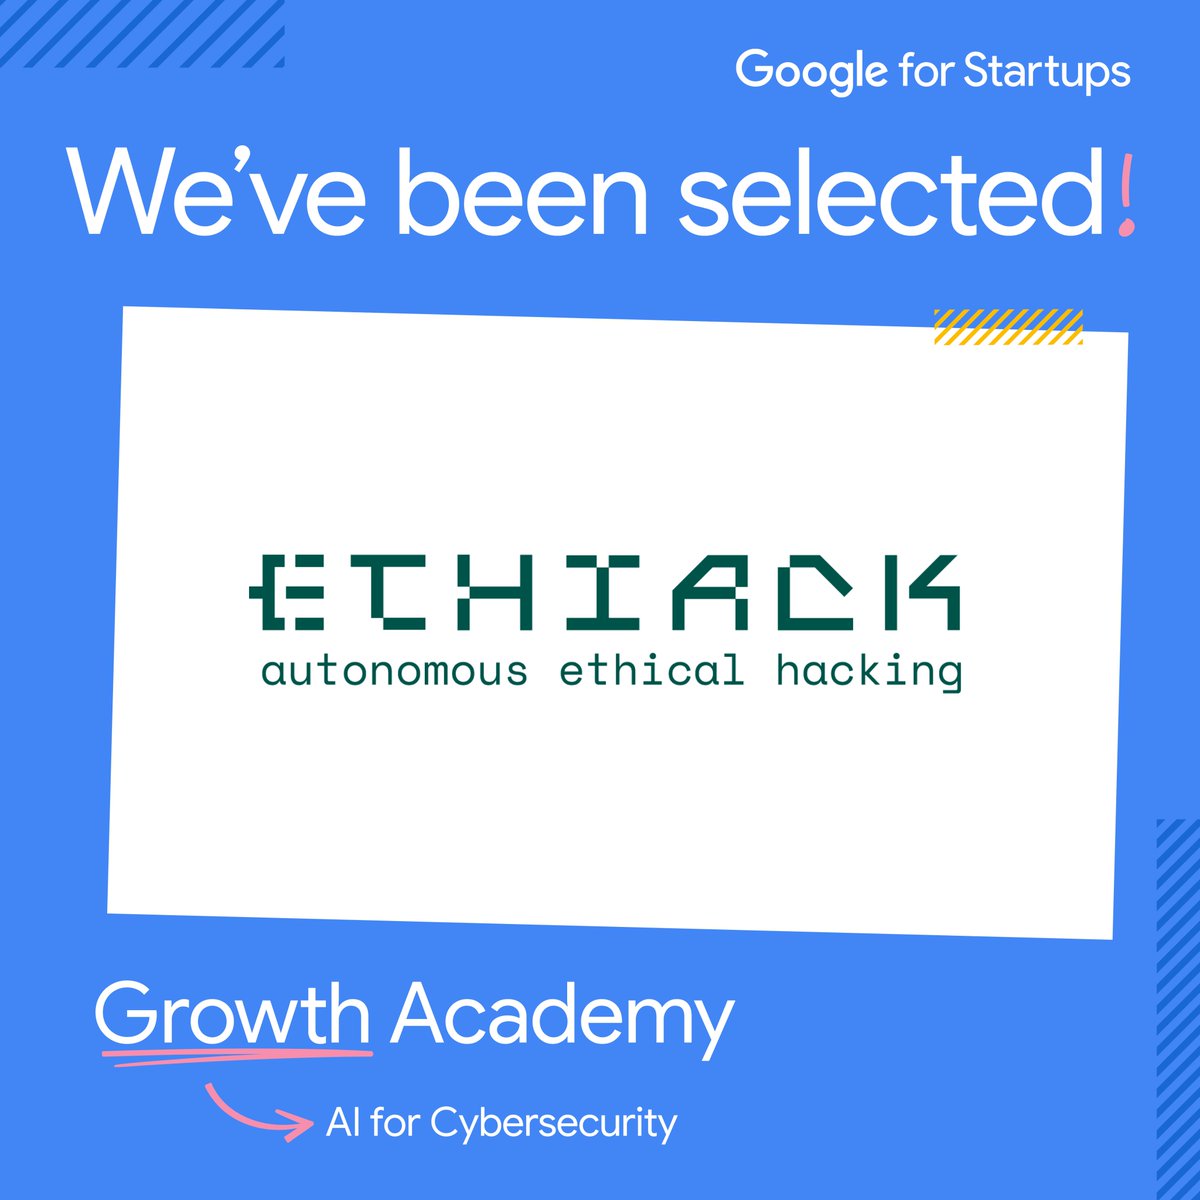 Google chose 17 cybersecurity startups to accelerate. And Ethiack is one of them 🏆

We’re now part of the @GoogleStartups Growth Academy: AI for Cybersecurity!

Read more on Google’s blog: blog.google/outreach-initi…

#GrowthAcademy #AIforCybersecurity